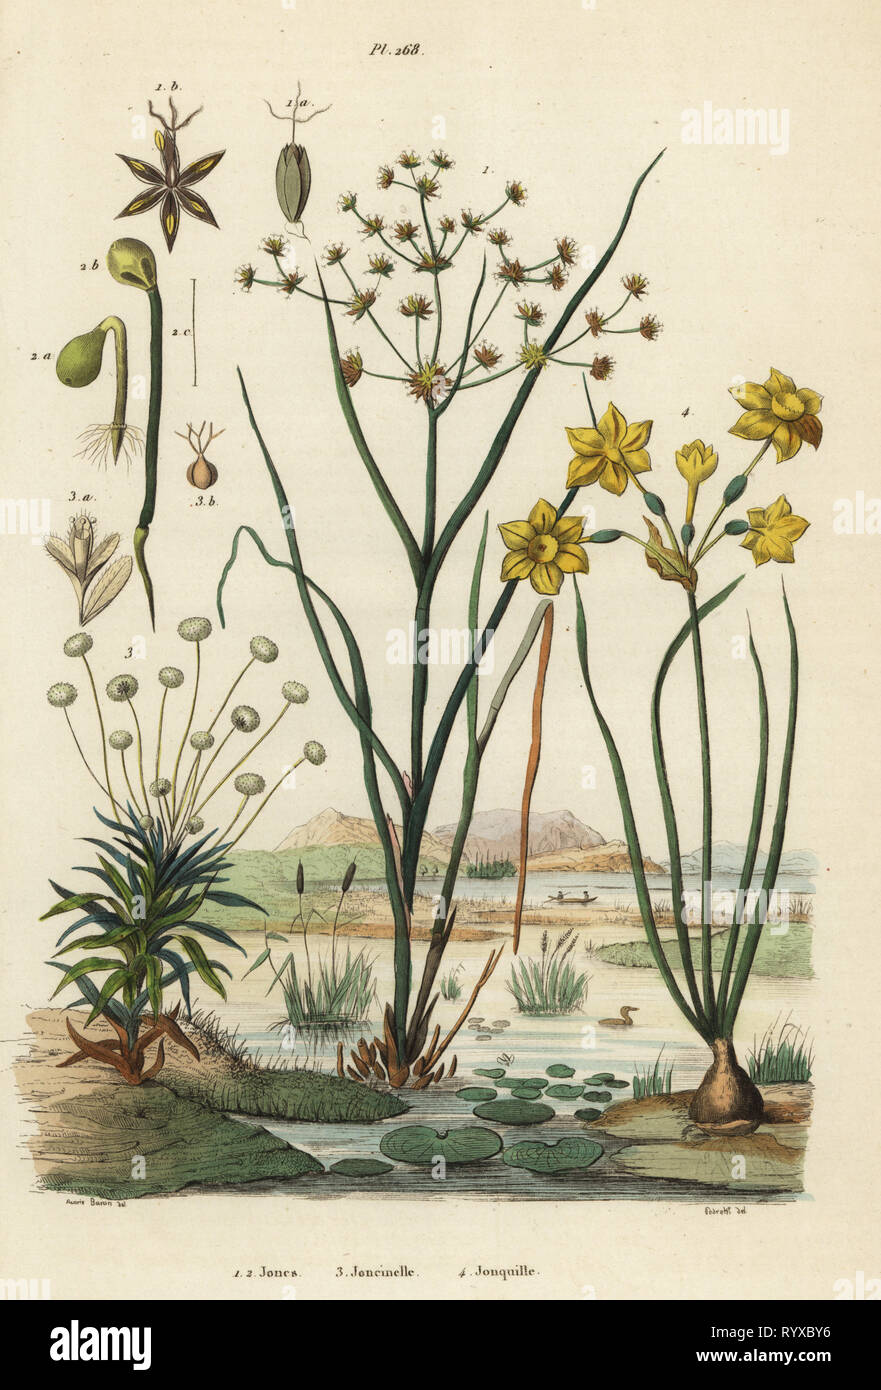 Jointed rush, Juncus articulatus 1, toad rush, Juncus bufonius 2, pipewort, Paepalanthus dendroides 3, and rush daffodil, Narcissus jonquilla 4. Jones, Joncinelle, Jonquille. Handcoloured steel engraving by Pedretti after an illustration by A. Carie Baron from Felix-Edouard Guerin-Meneville's Dictionnaire Pittoresque d'Histoire Naturelle (Picturesque Dictionary of Natural History), Paris, 1834-39. Stock Photo